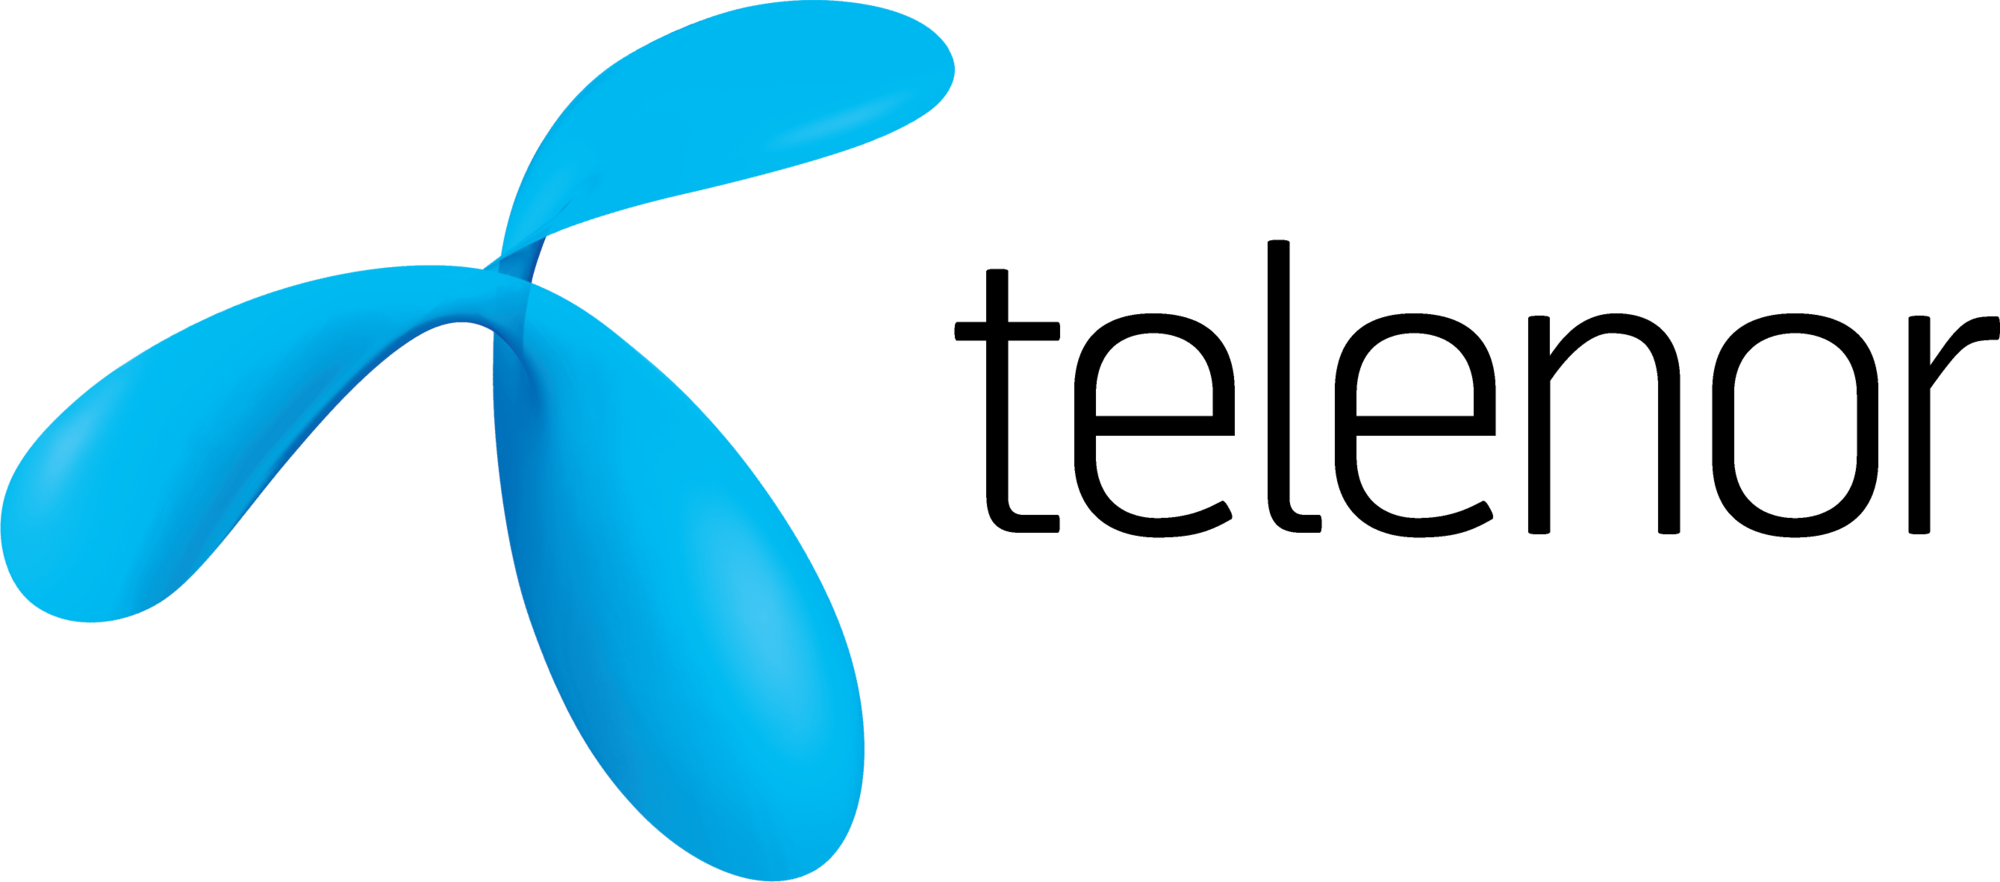 Telenor 4G Packages in Pakist